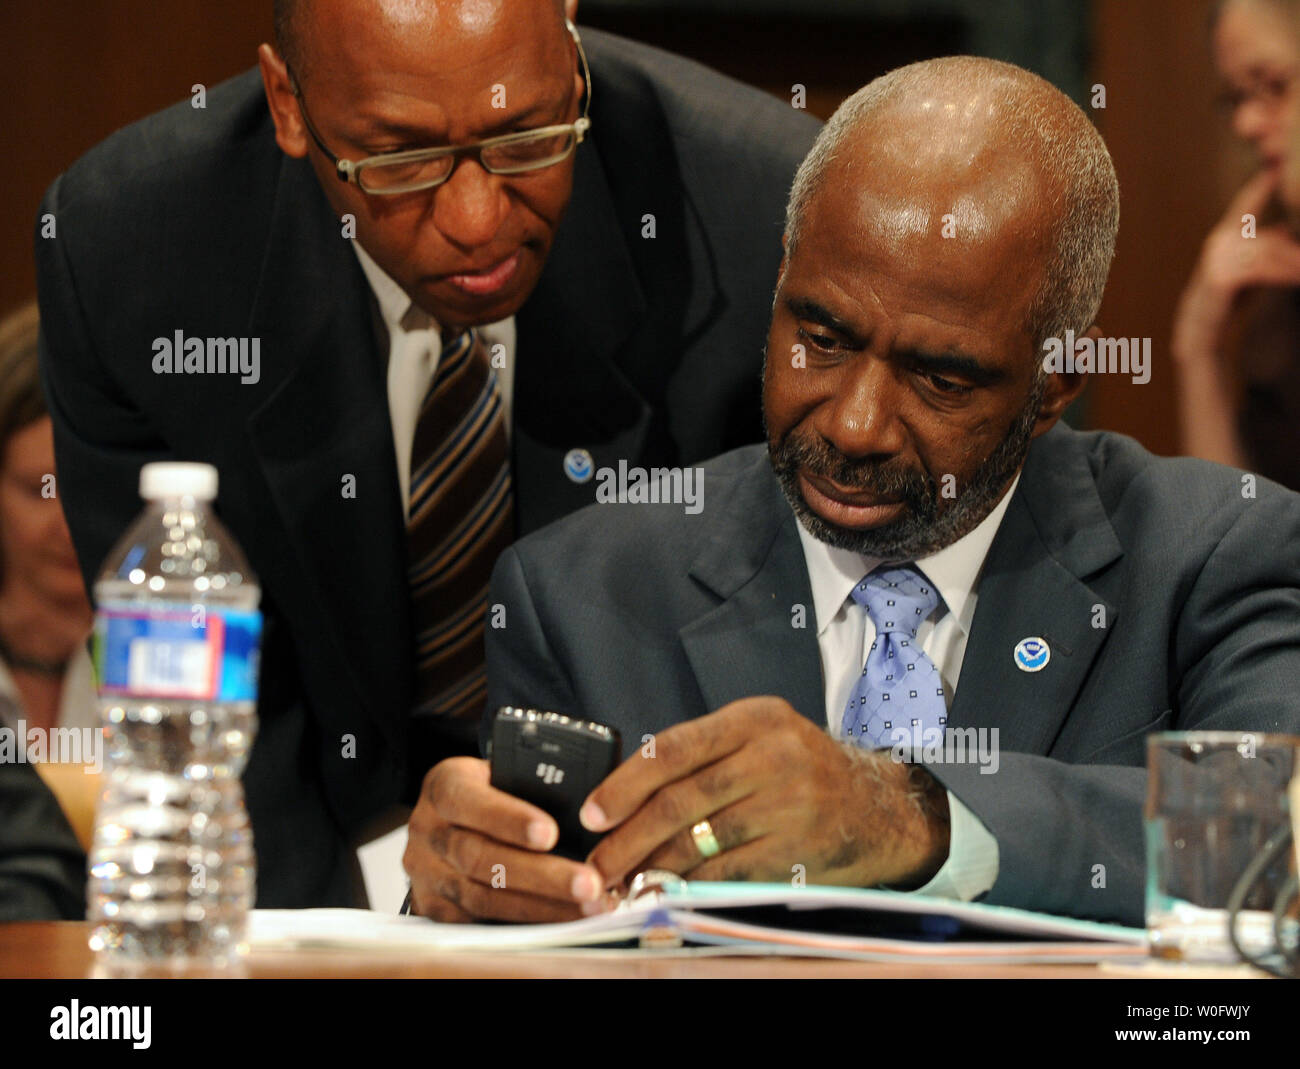 Assistant Commerce Secretary for Oceans and Atmosphere Larry Robinson of the National Oceanic and Atmospheric Administration (NOAA) (R) speaks with an aide prior to testifying before the Senate Appropriations Committee Commcer, Justice, Science and Related Agencies Subcommittee regarding the use of dispersants in response to the Deepwater Horizon oil spill on Capitol Hill in Washington on July 15, 2010.    UPI/Roger L. Wollenberg Stock Photo